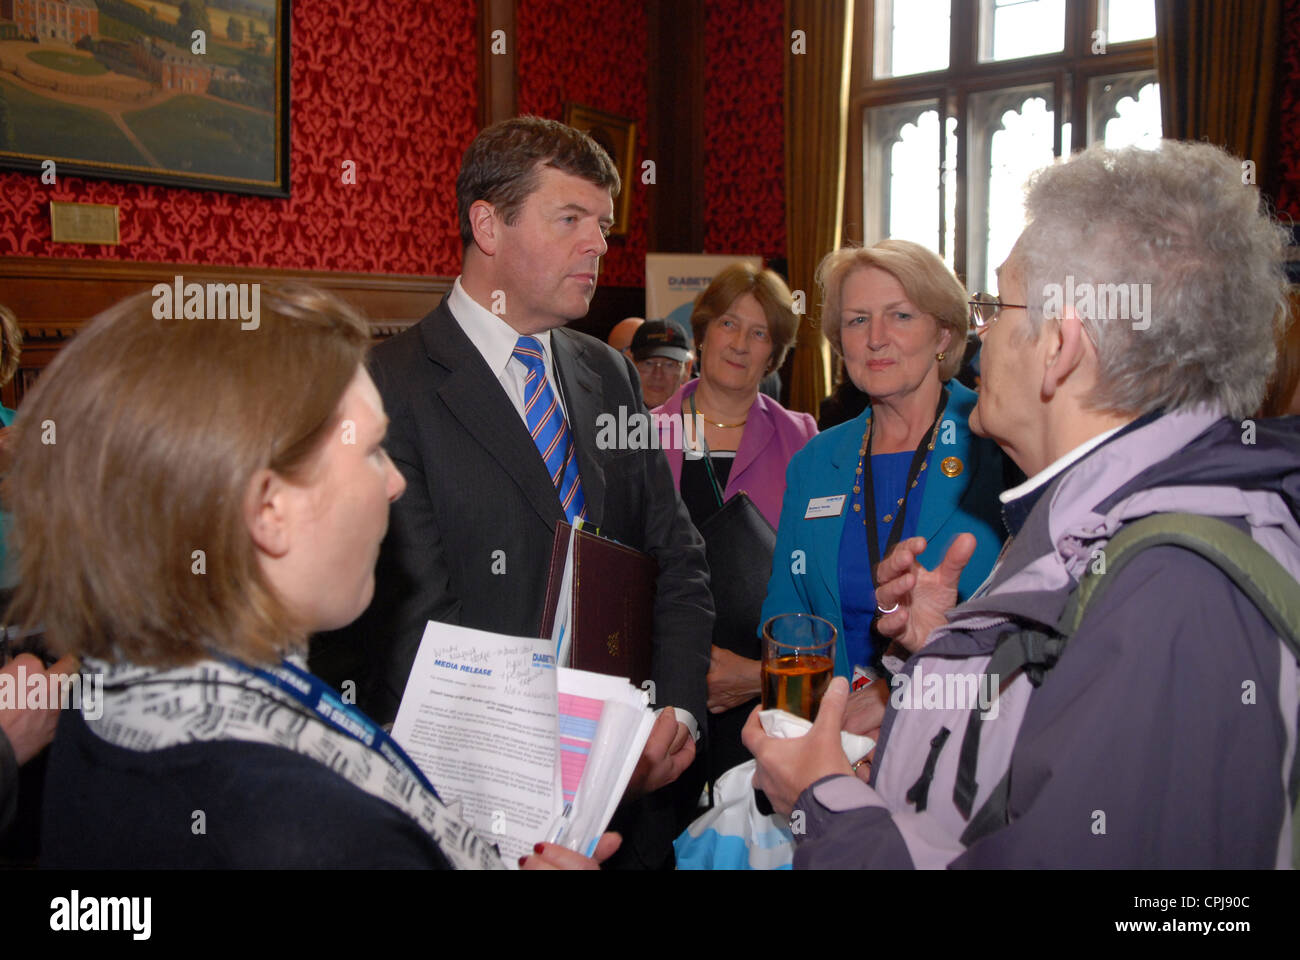 MP Paul Burstow at Houses of Palriament listening to delegates at a Diabetes lobby day, London, UK. Stock Photo